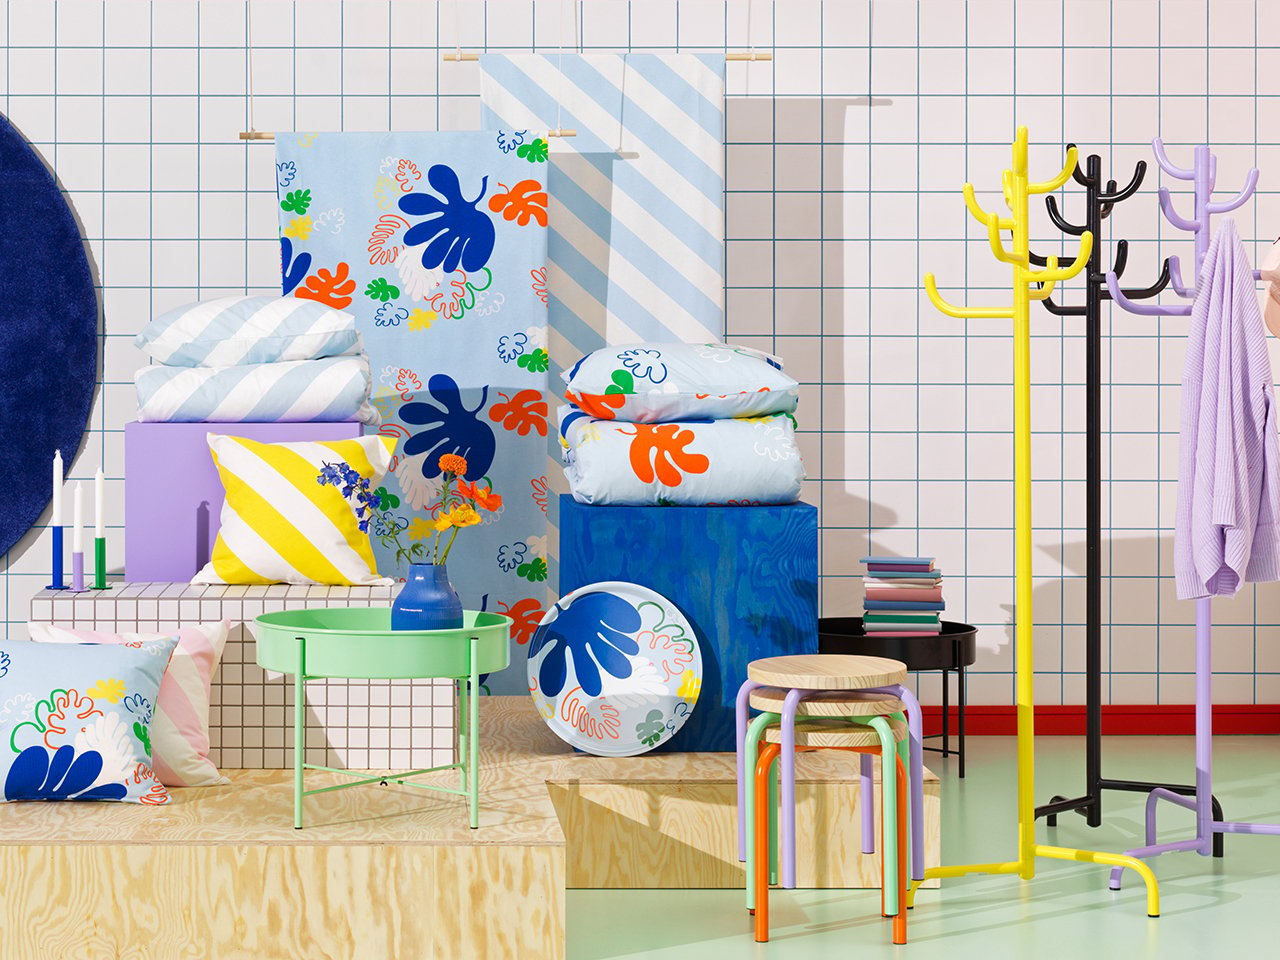 A selection of furniture and home accessories from the Ikea Nytillverkad collection.